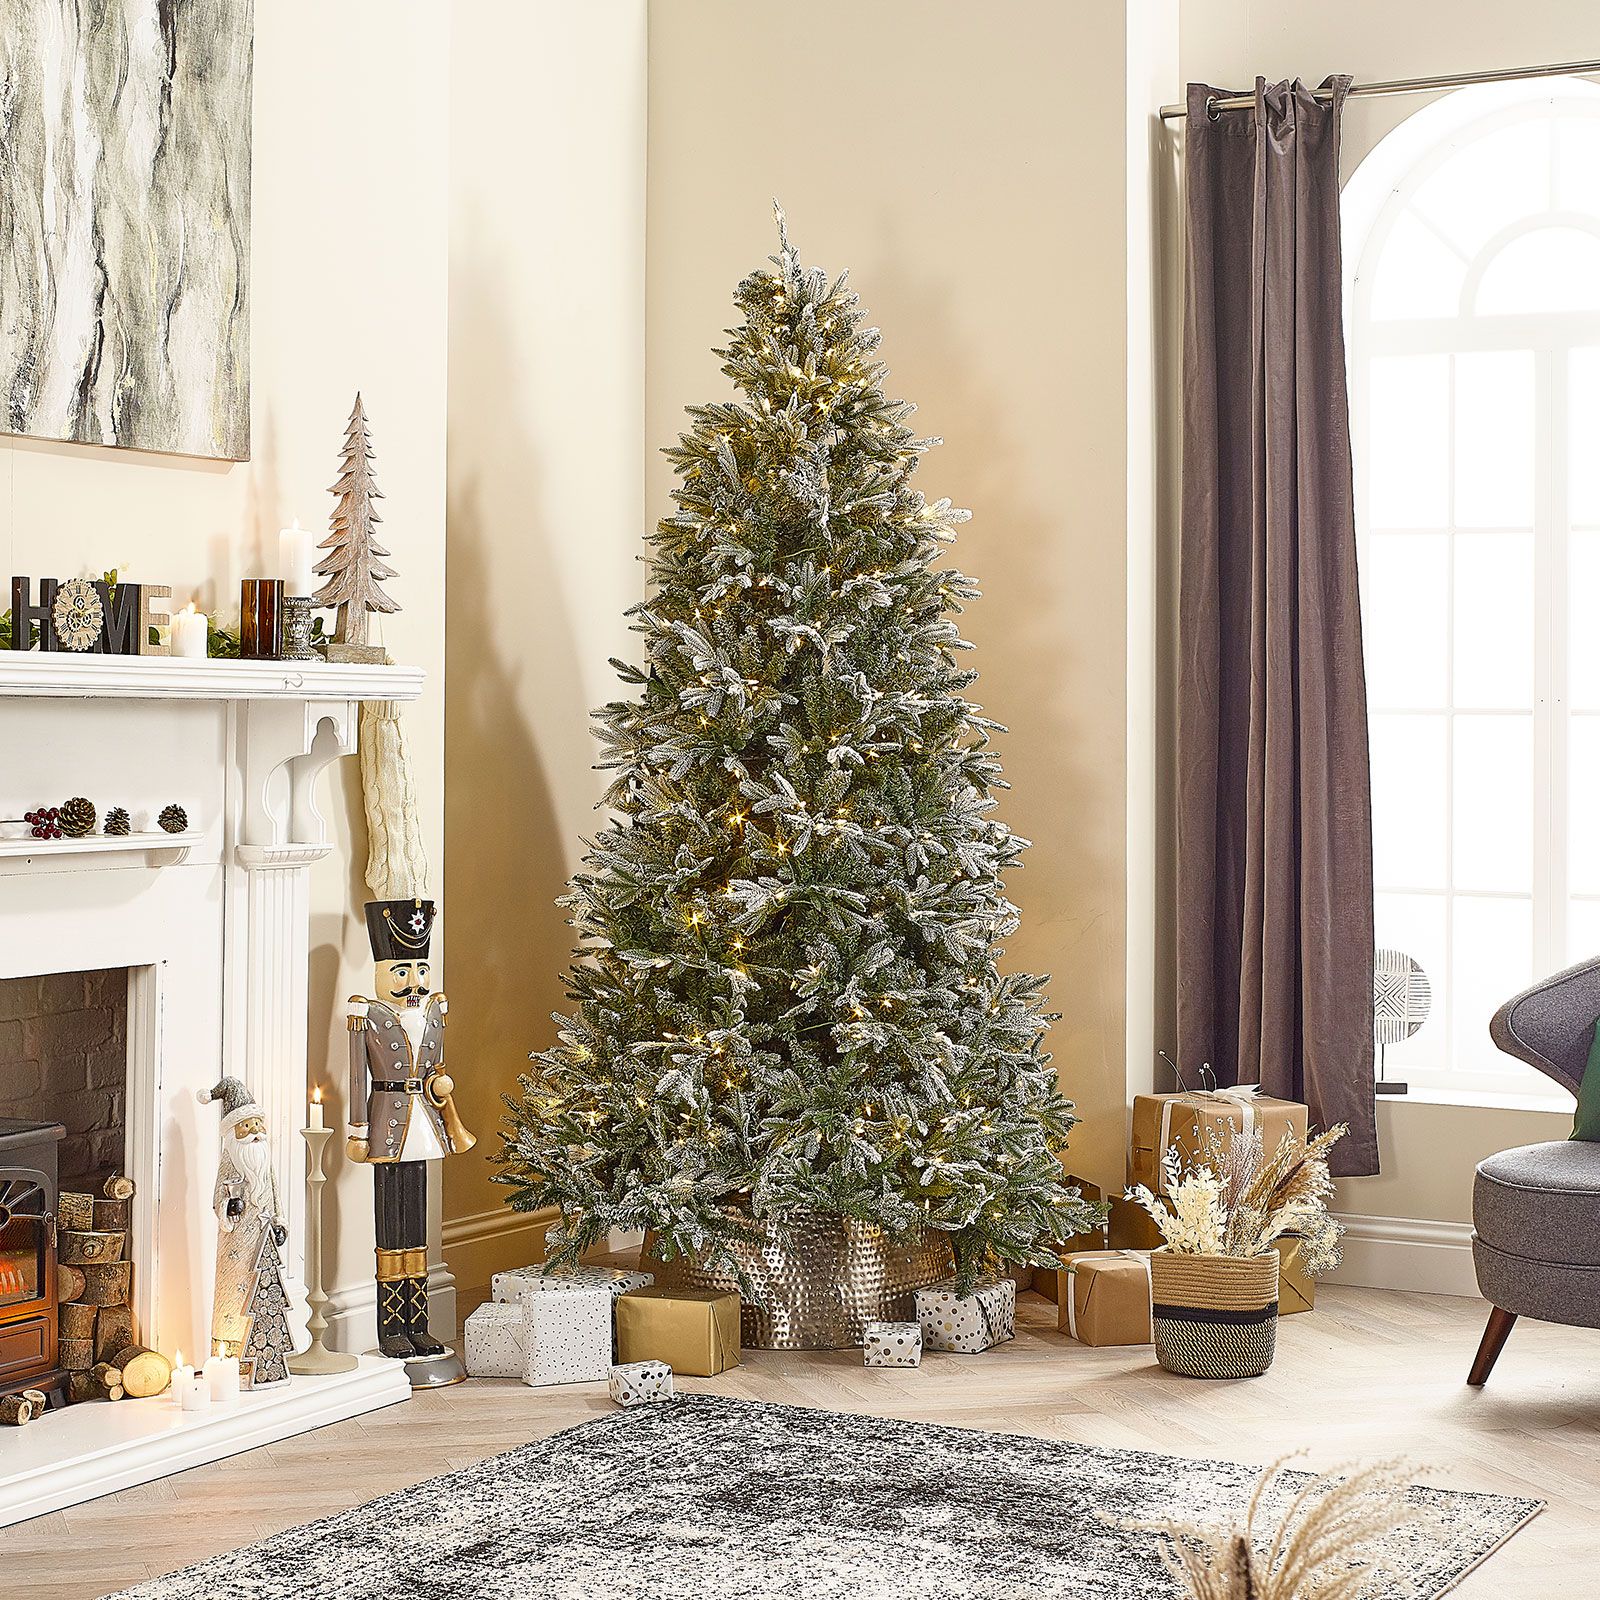 The 6.5ft Pre-Lit Frosted Scotch Pine Artificial Christmas Tree